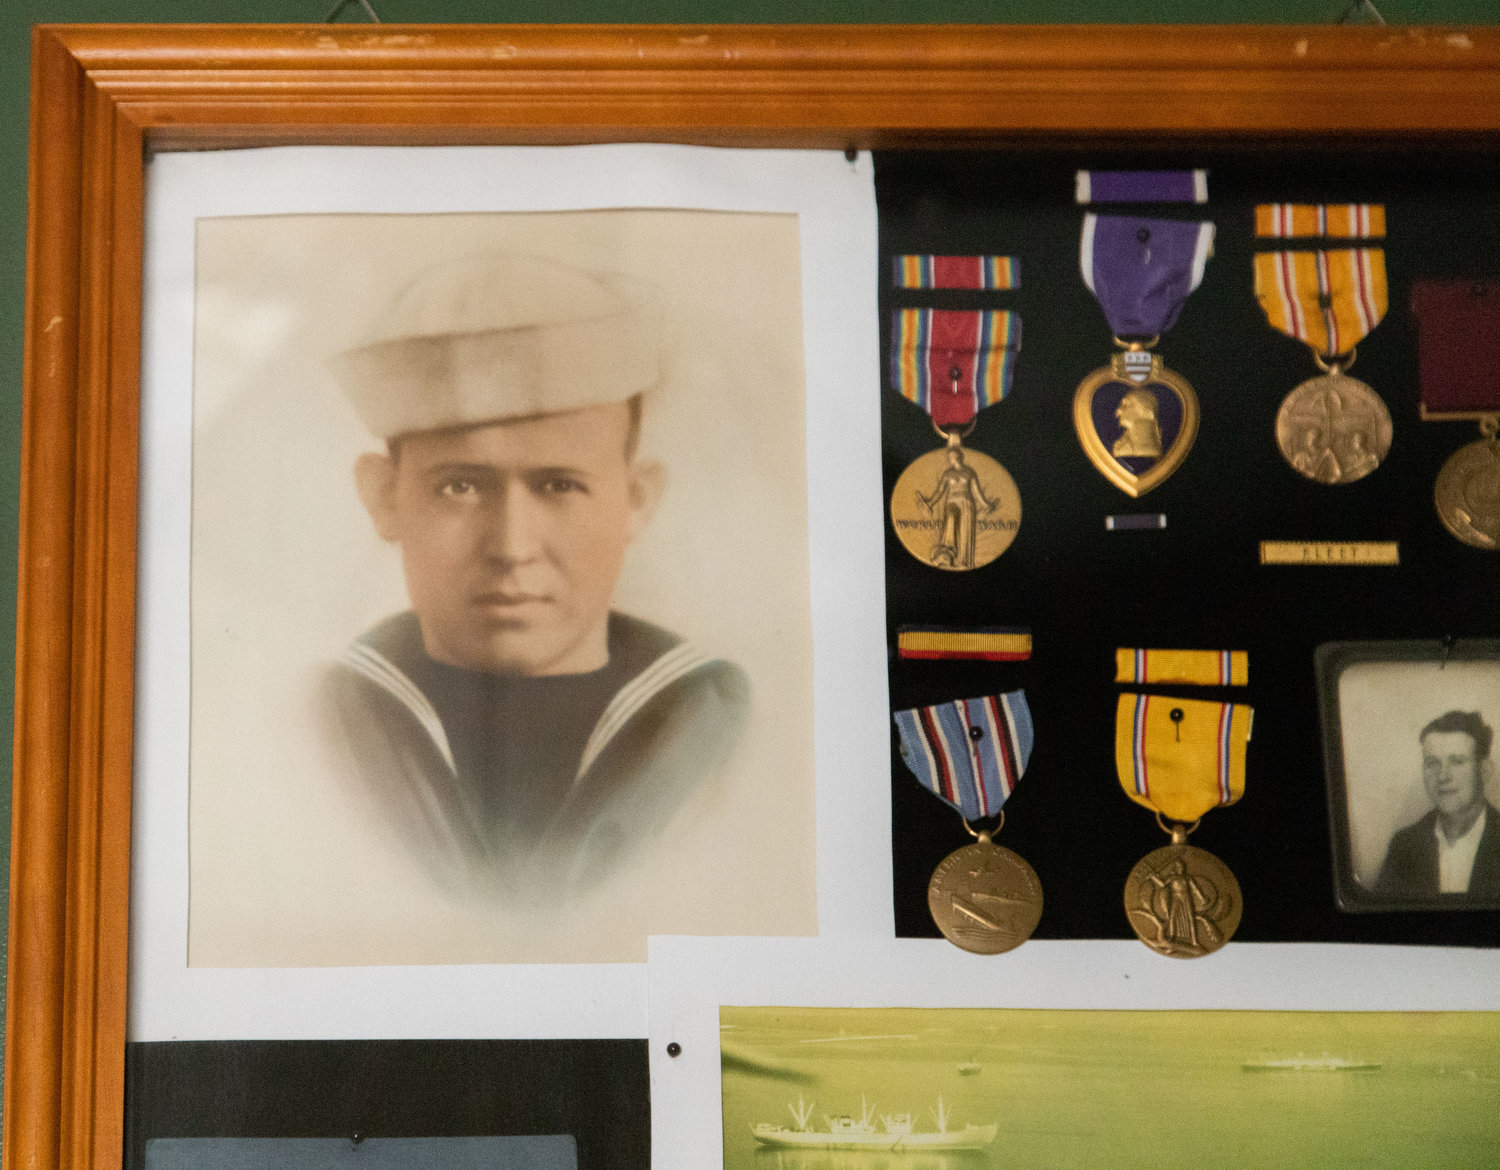 Former Moberly resident Dale Brockman displays his uncle’s photo and medals in his home in Paris. Brockman began researching the destruction of the USS Houston and the resulting fatalities about 1996 when his aunt revealed that his Uncle Clarence had died on the ship in February of 1942.